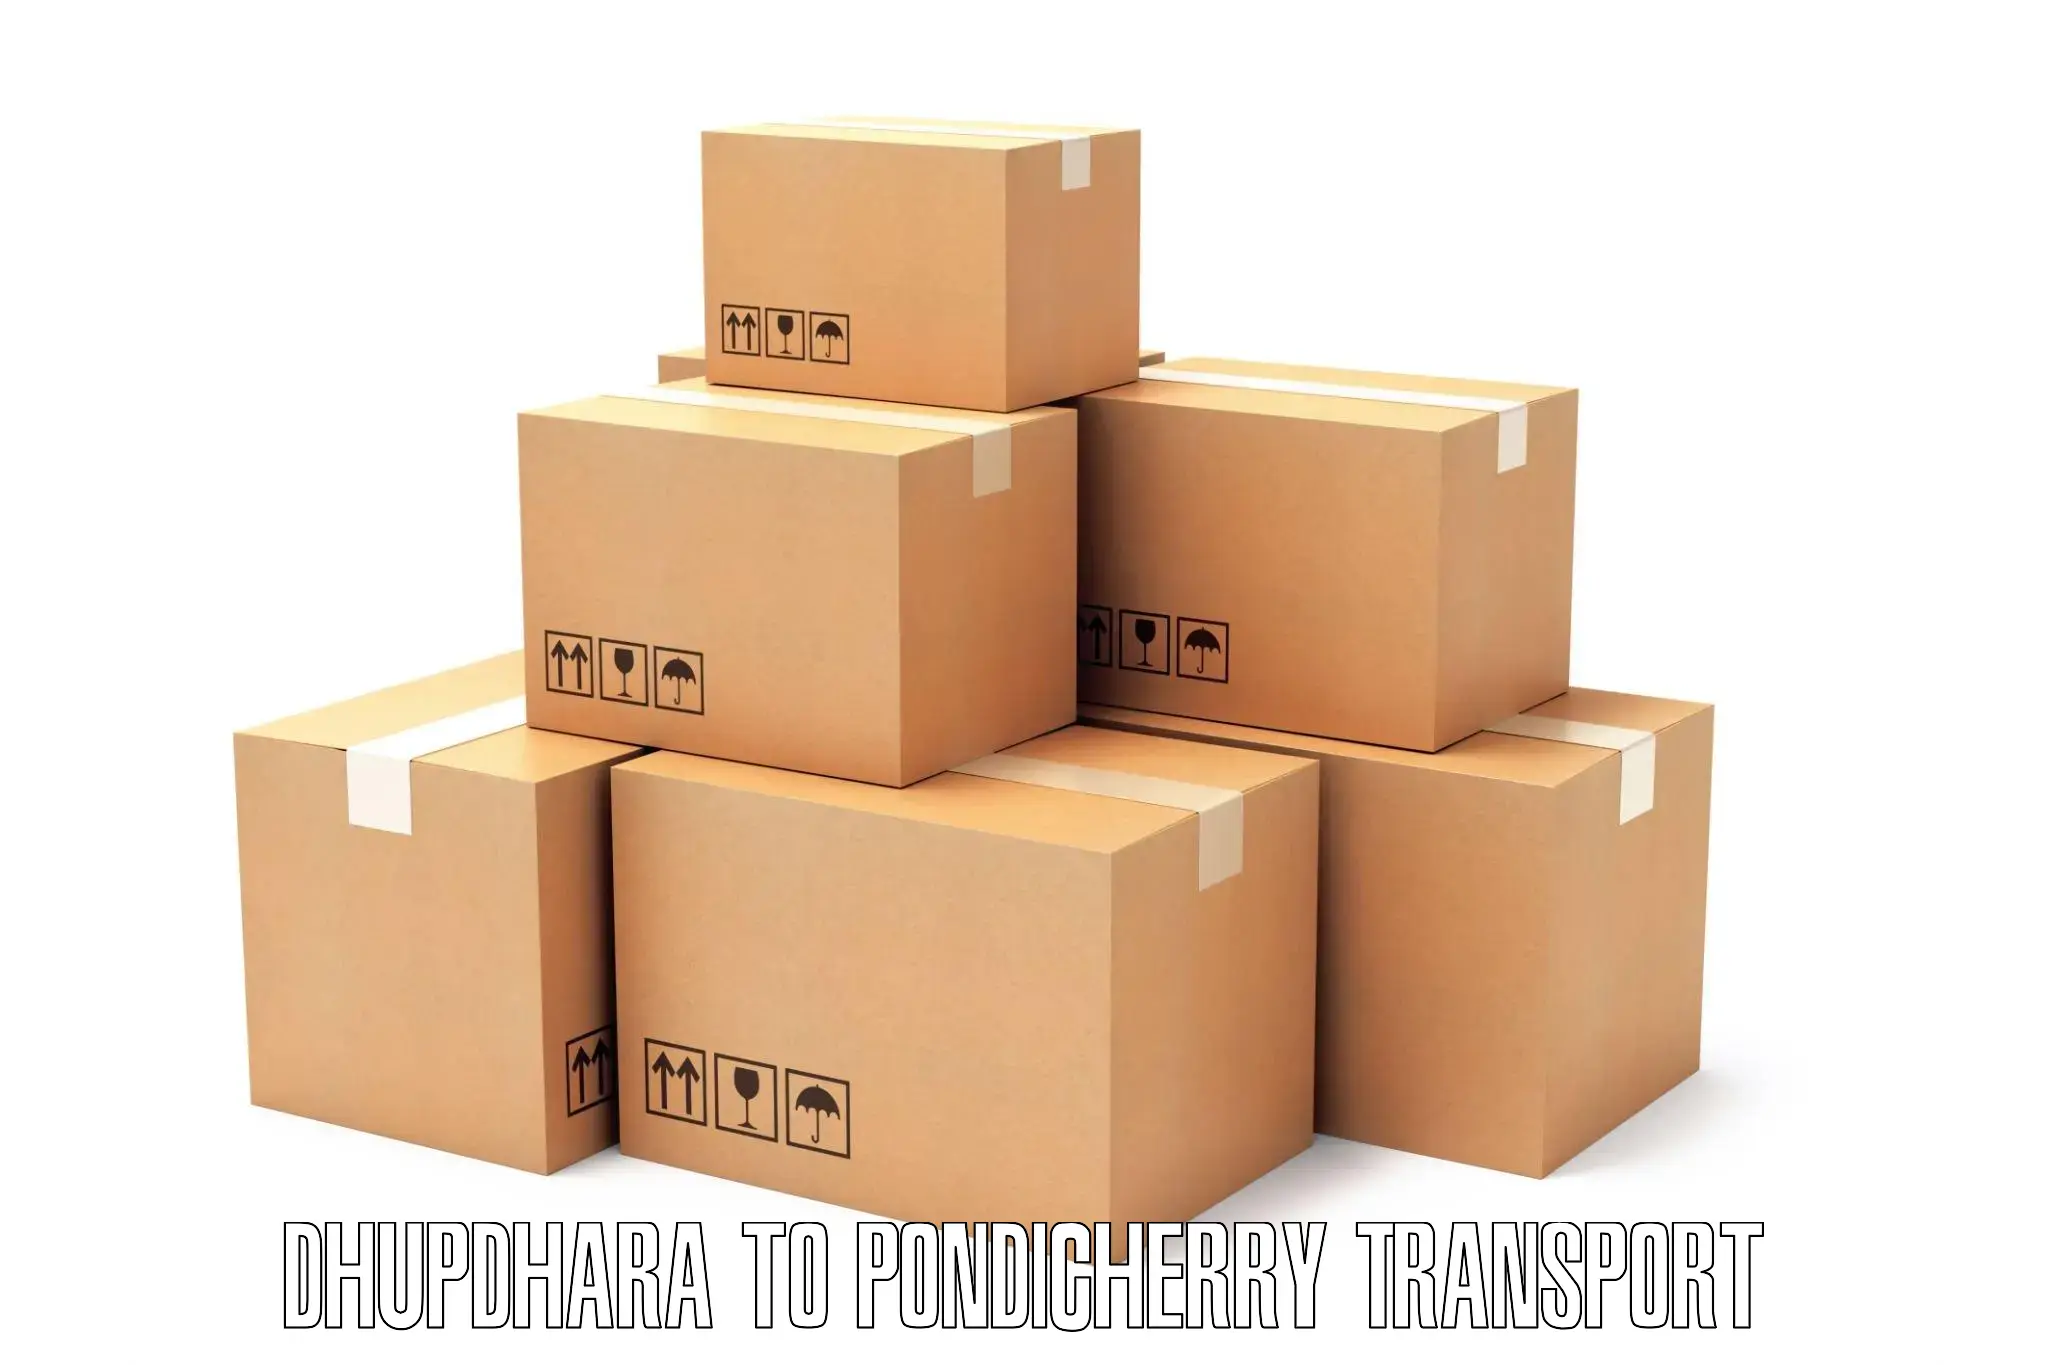 Daily parcel service transport Dhupdhara to Pondicherry